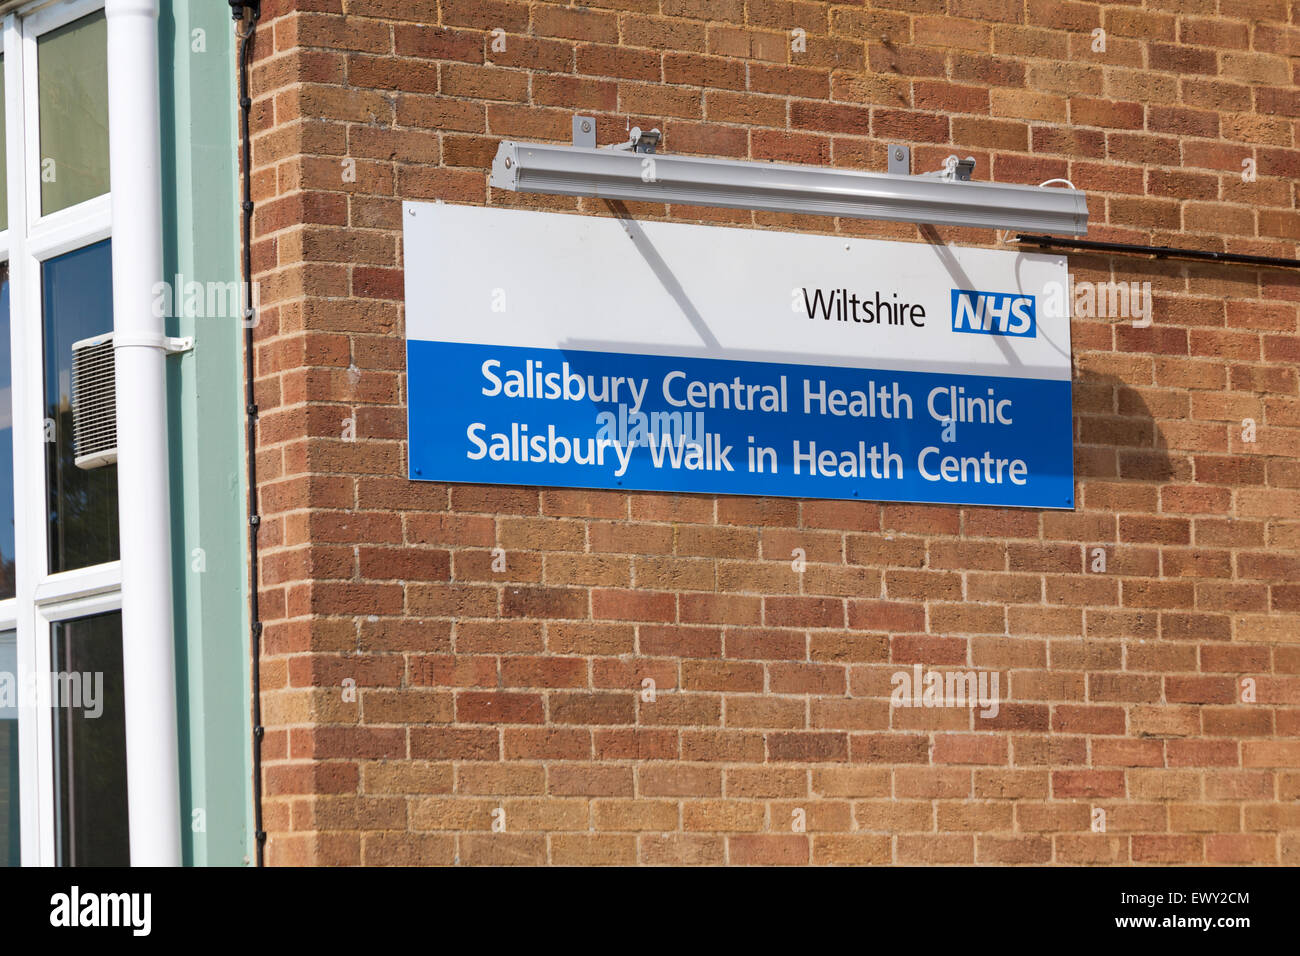 Wiltshire NHS sign on wall for Salisbury Central Health Clinic and Salisbury Walk in Health Centre in Salisbury Stock Photo